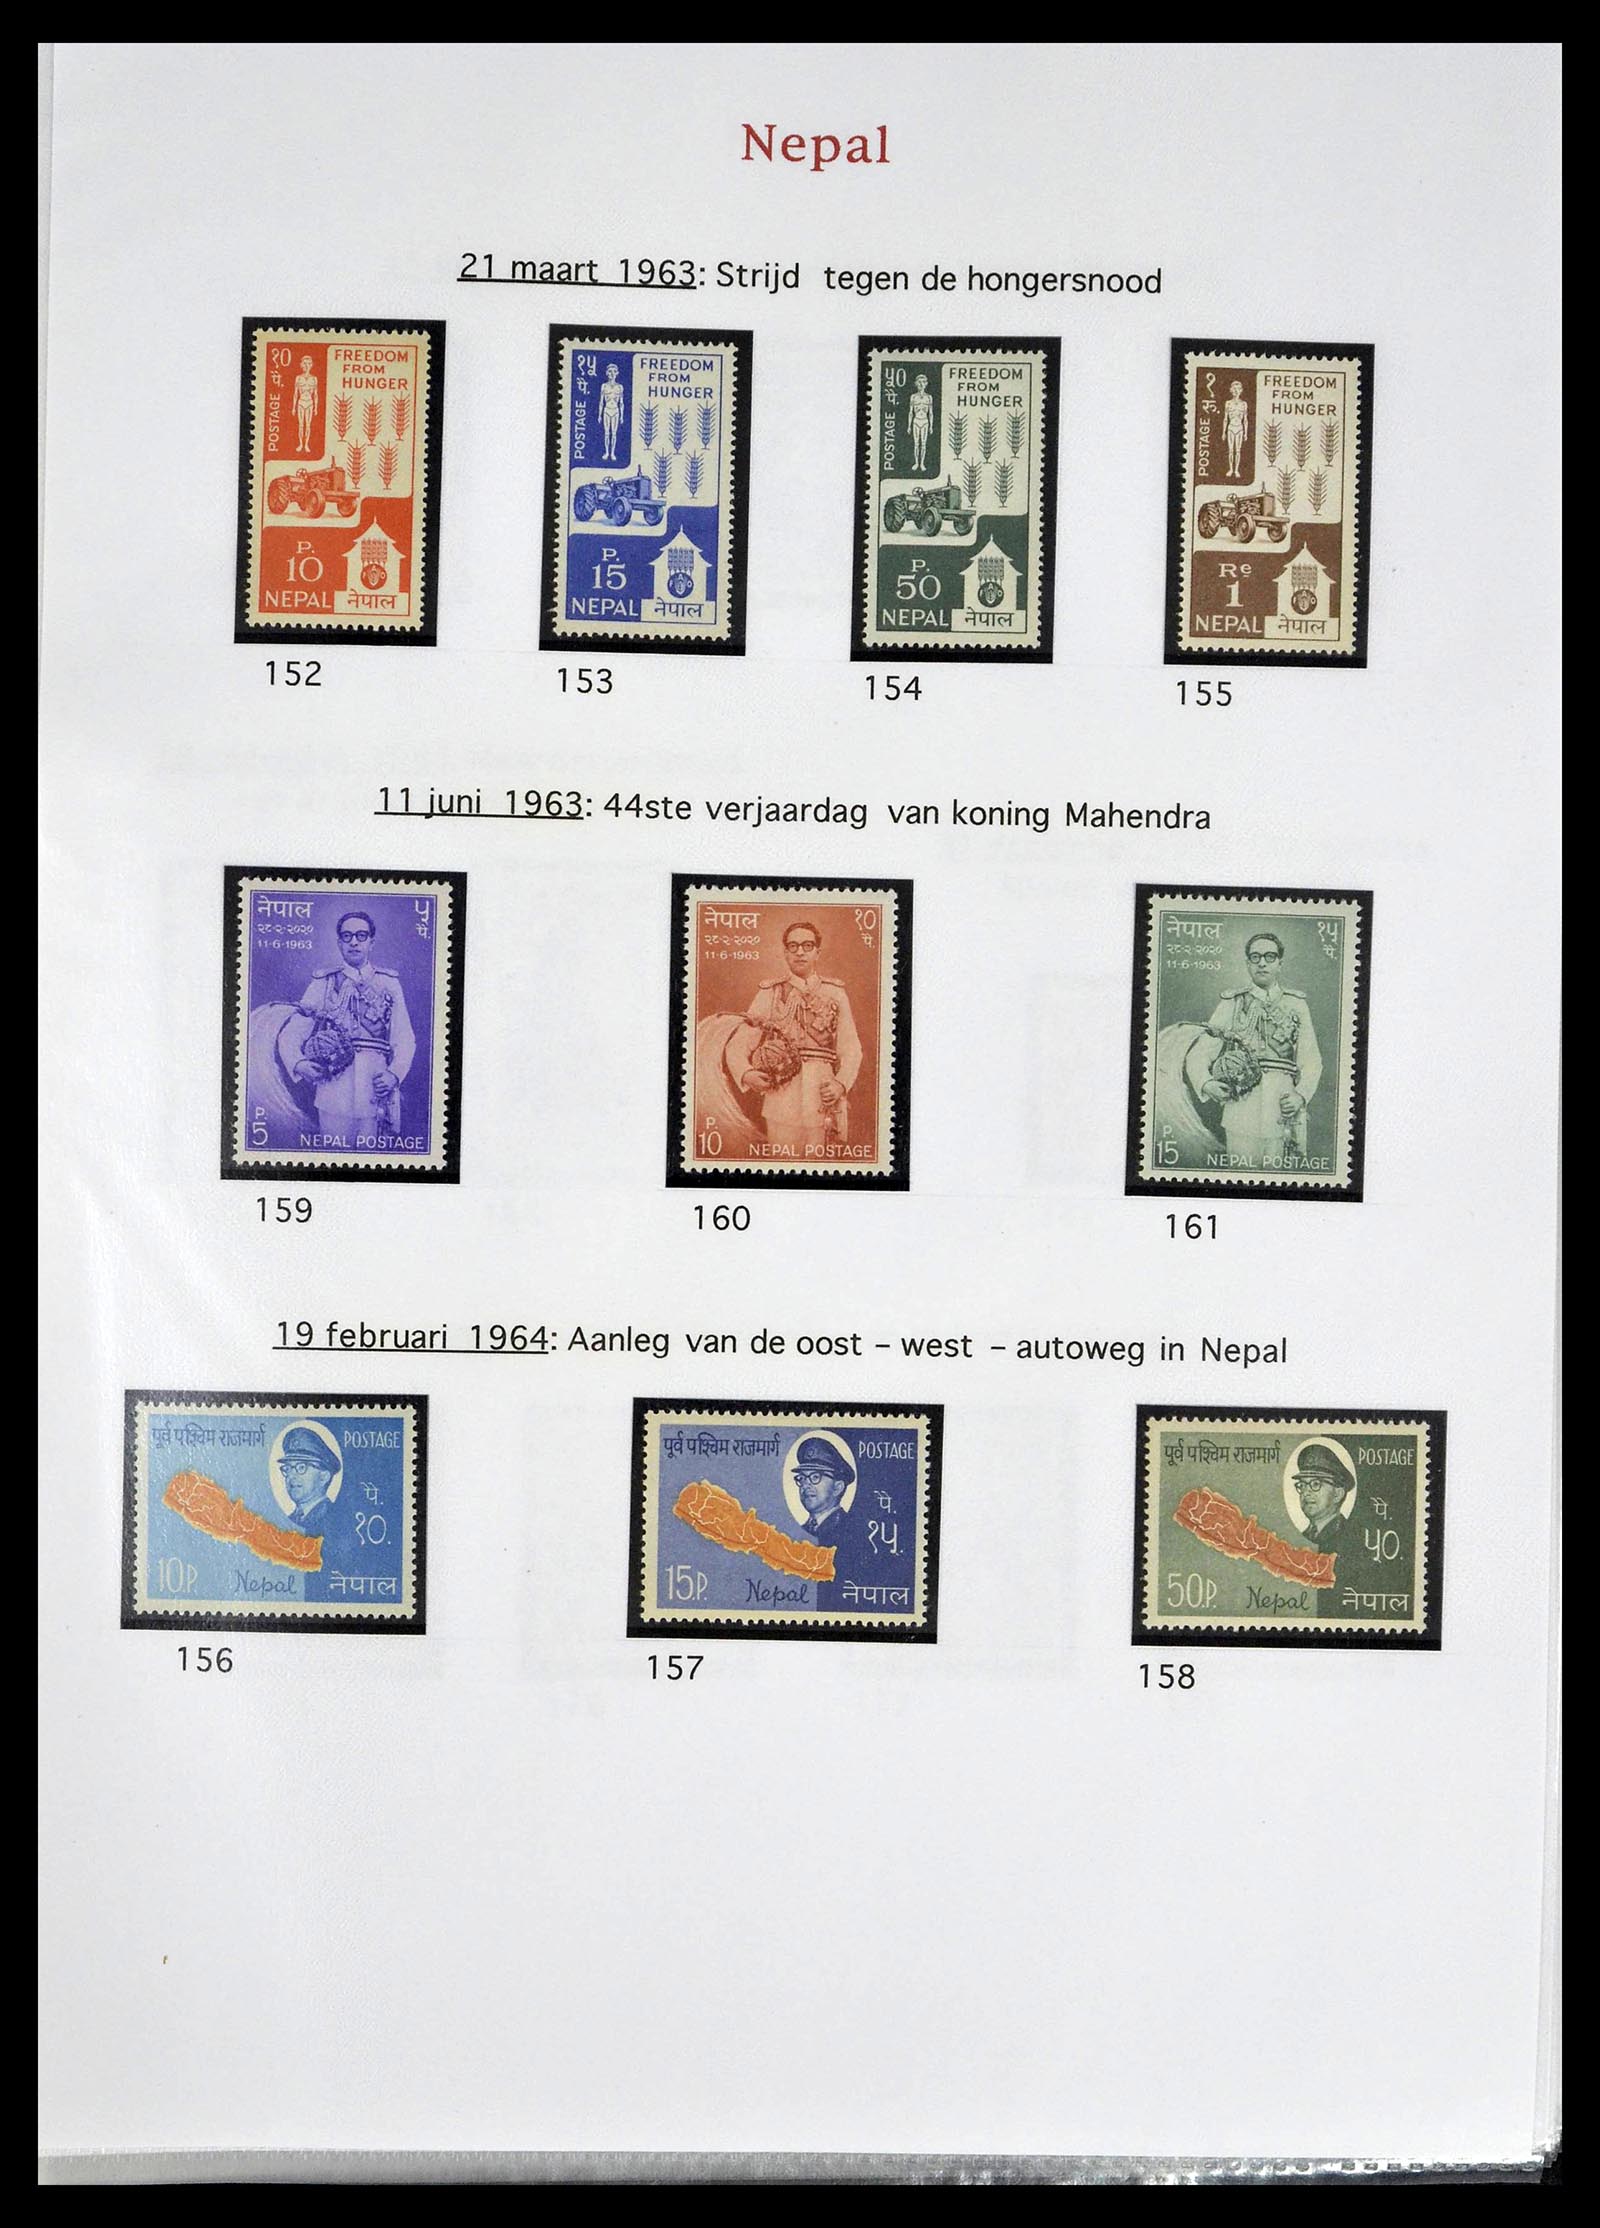 39313 0017 - Stamp collection 39313 Nepal 1881-1999.